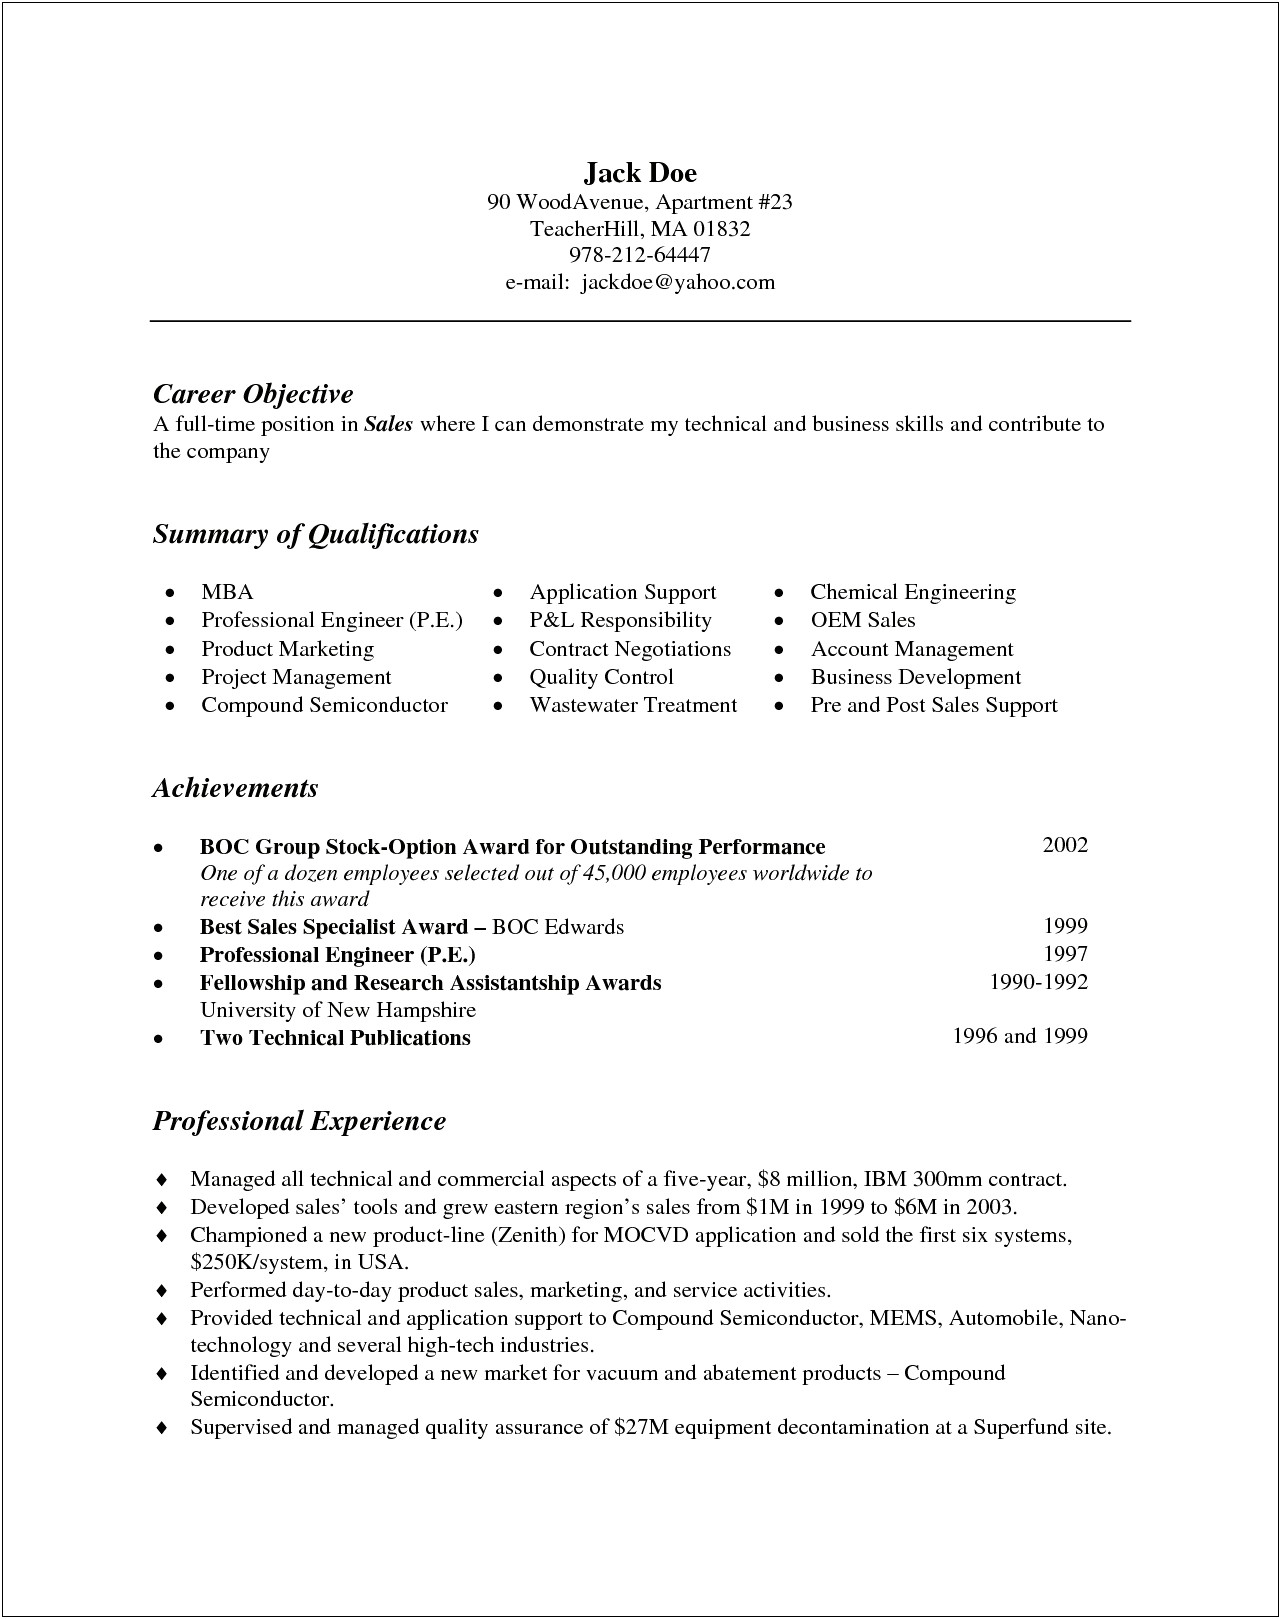 Resume Work Experience Bullet Points Or Paragraph